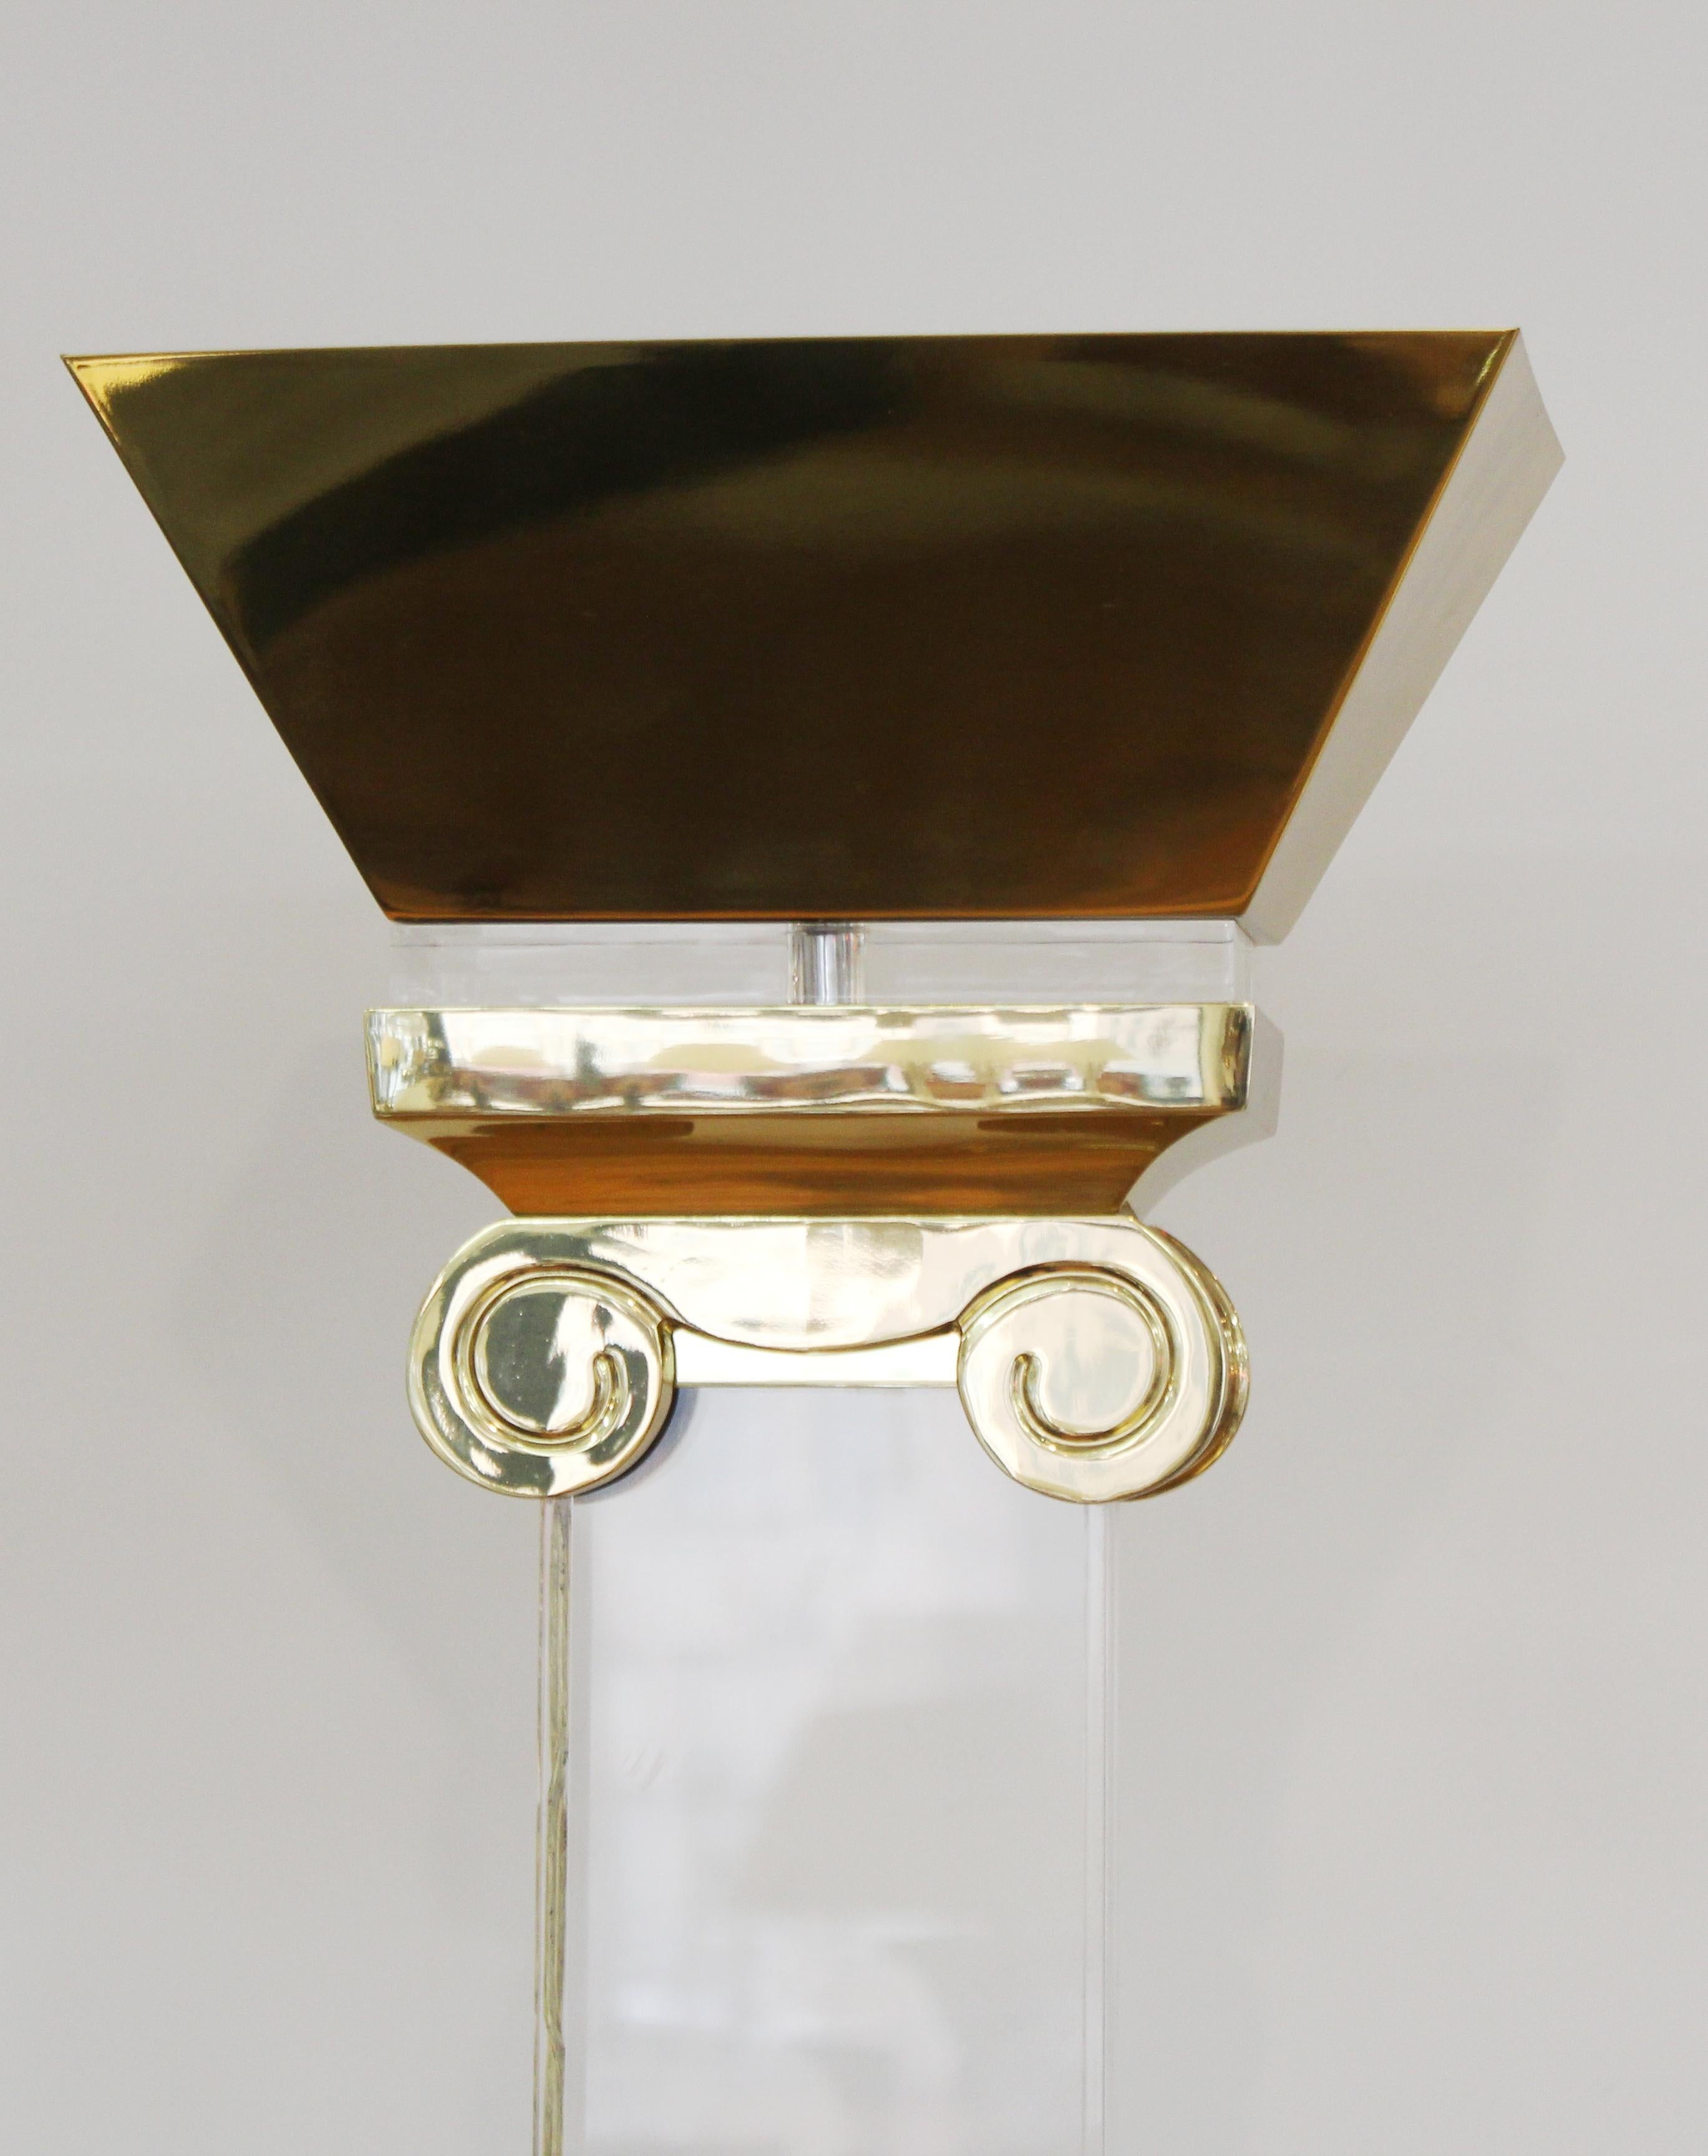 Postmodern ionic column shaped torchiere floor lamp with brass chapter and base and Lucite column.